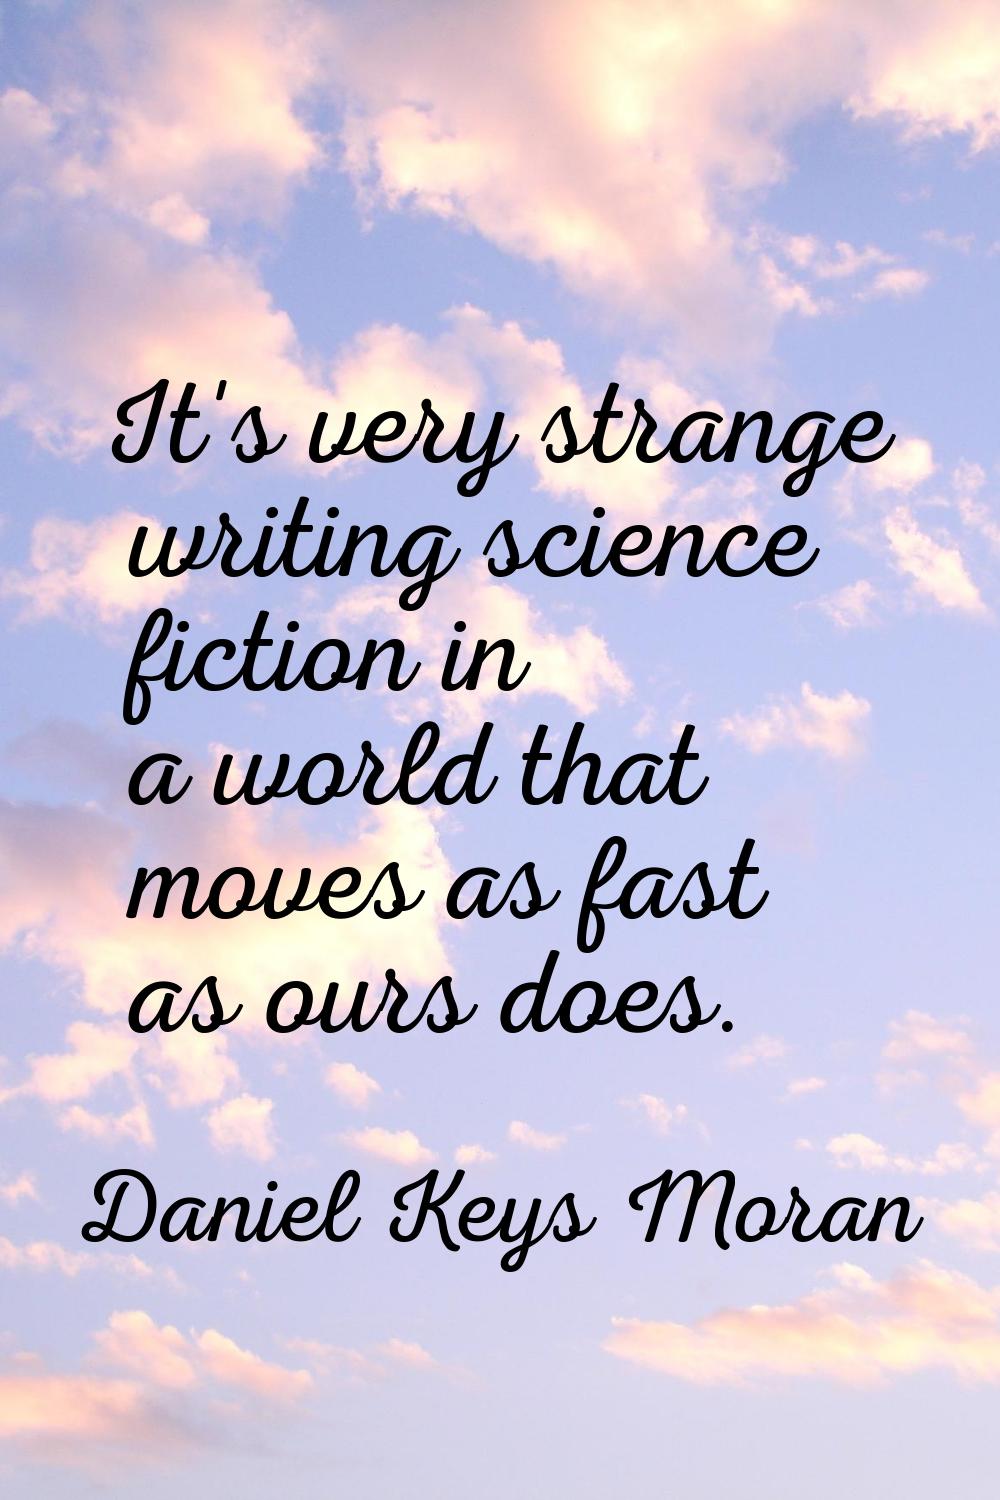 It's very strange writing science fiction in a world that moves as fast as ours does.